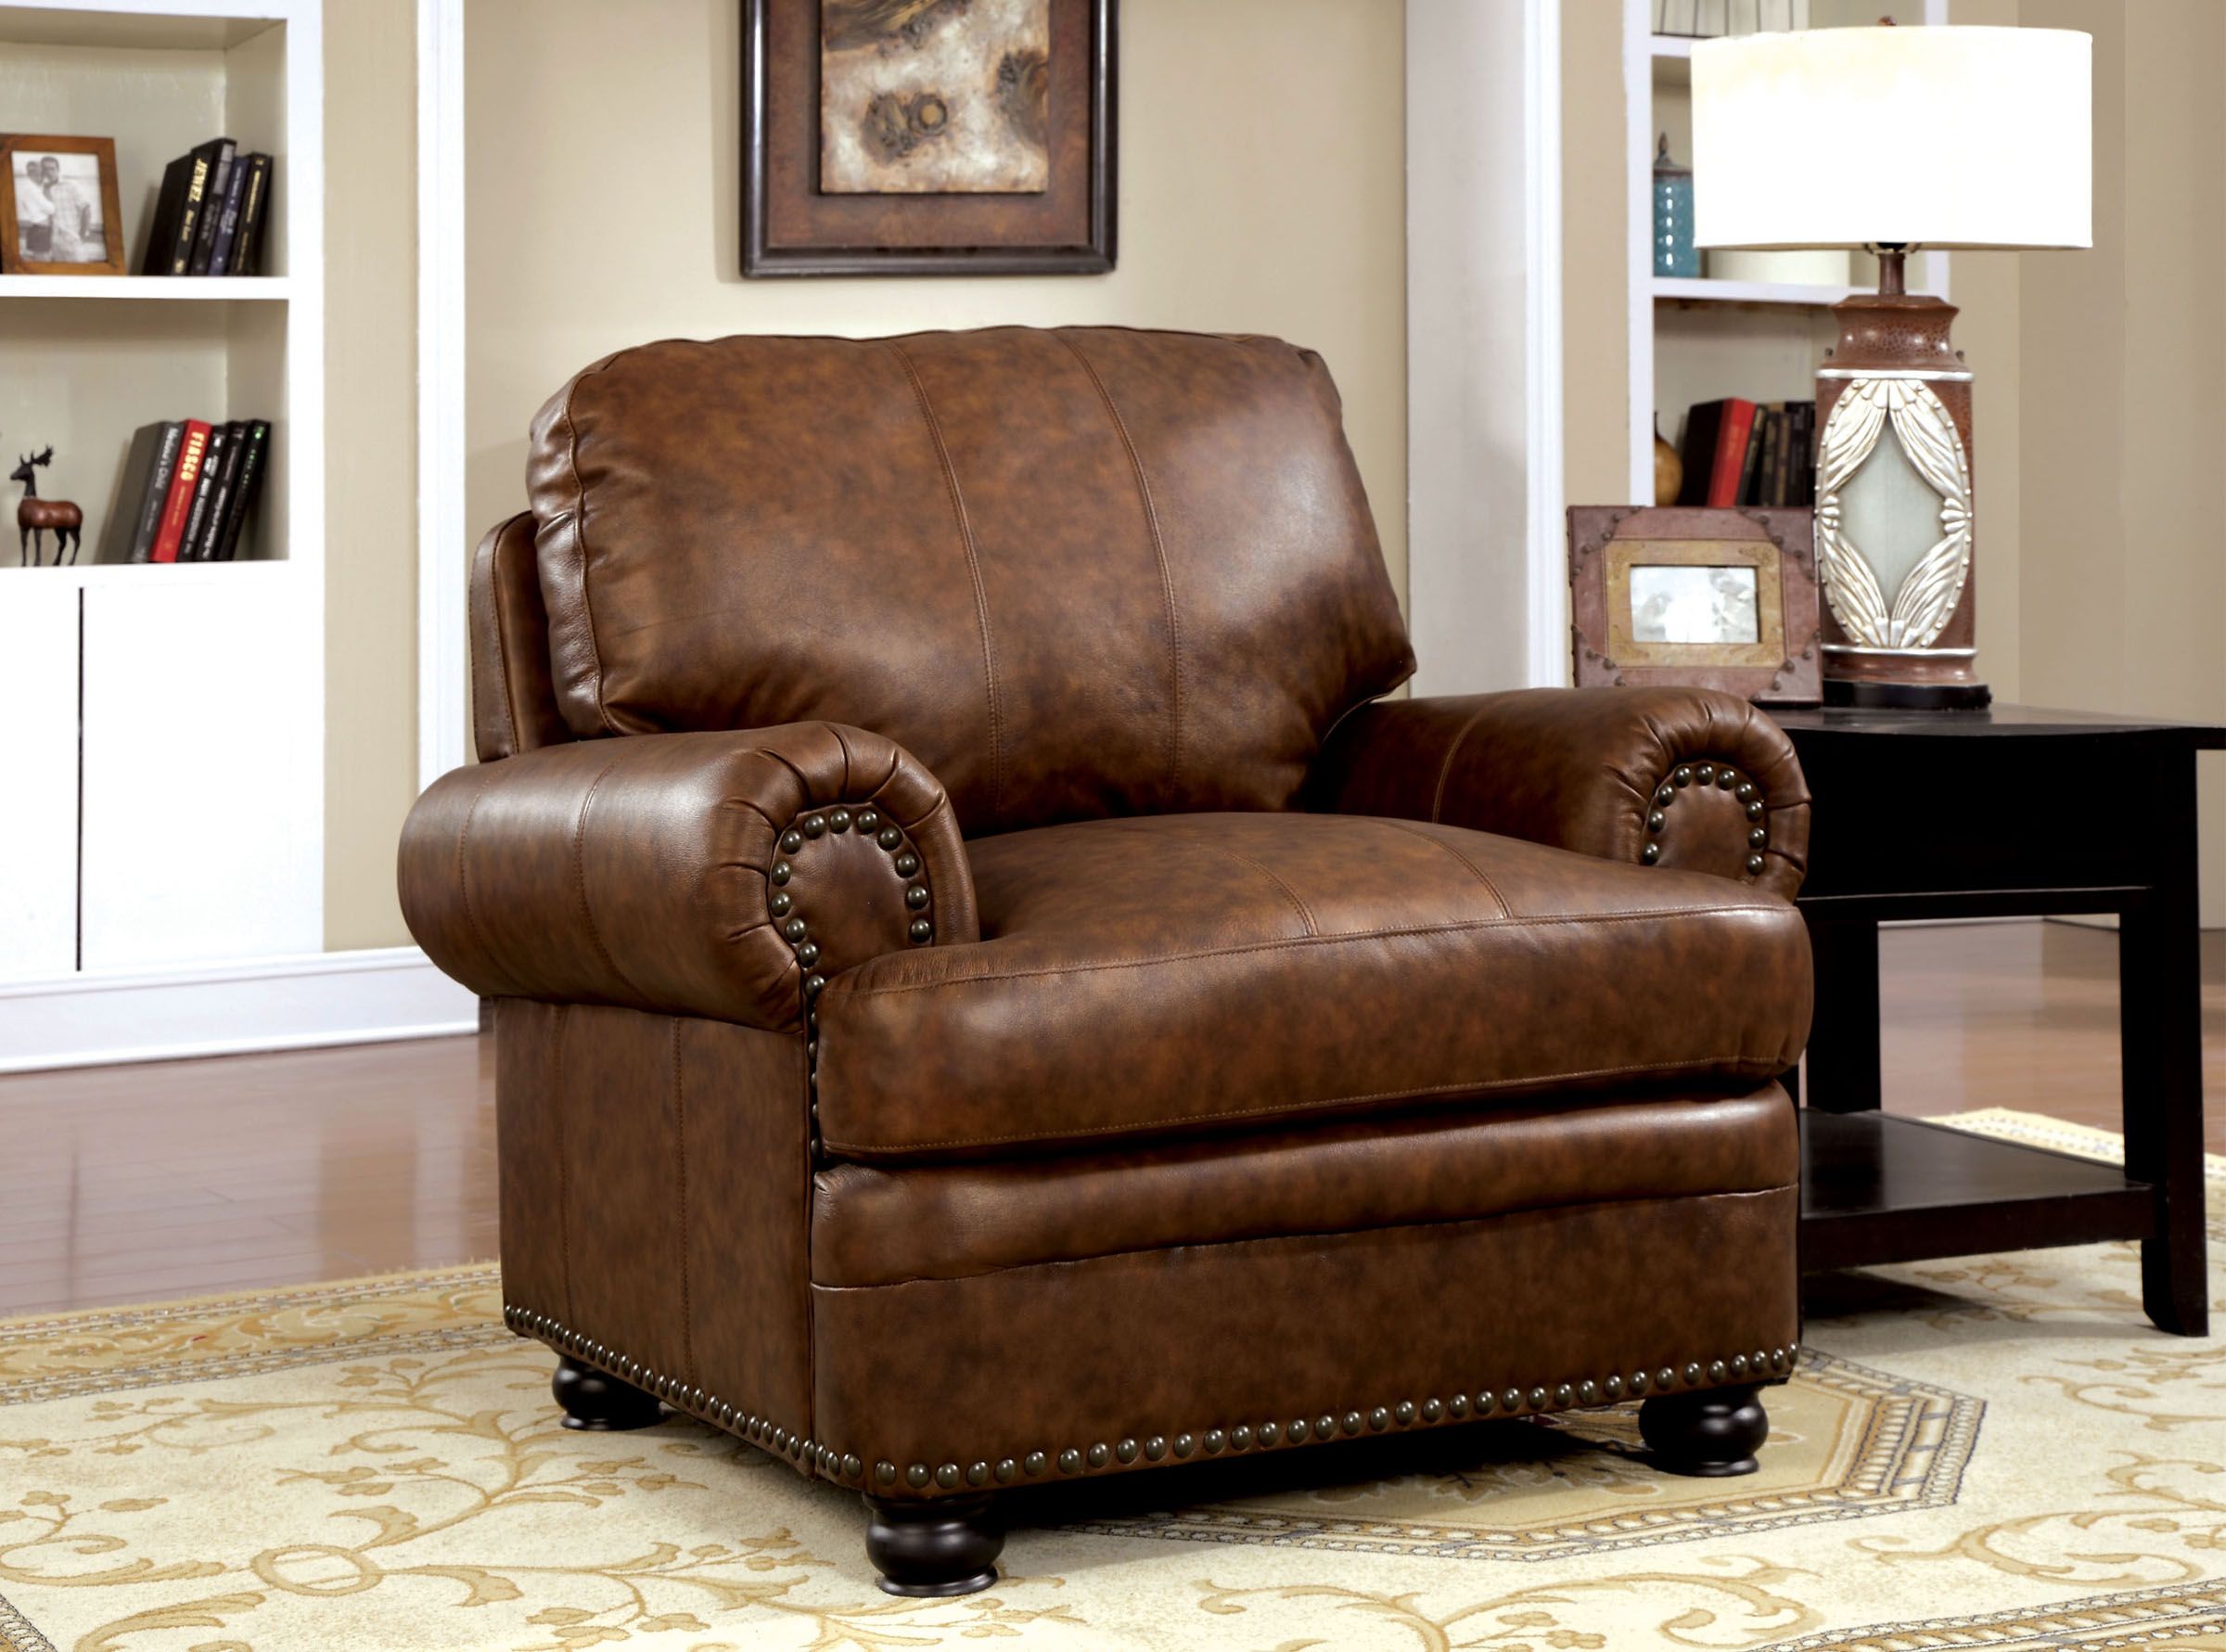 Top Grain Leather Living Room Sets